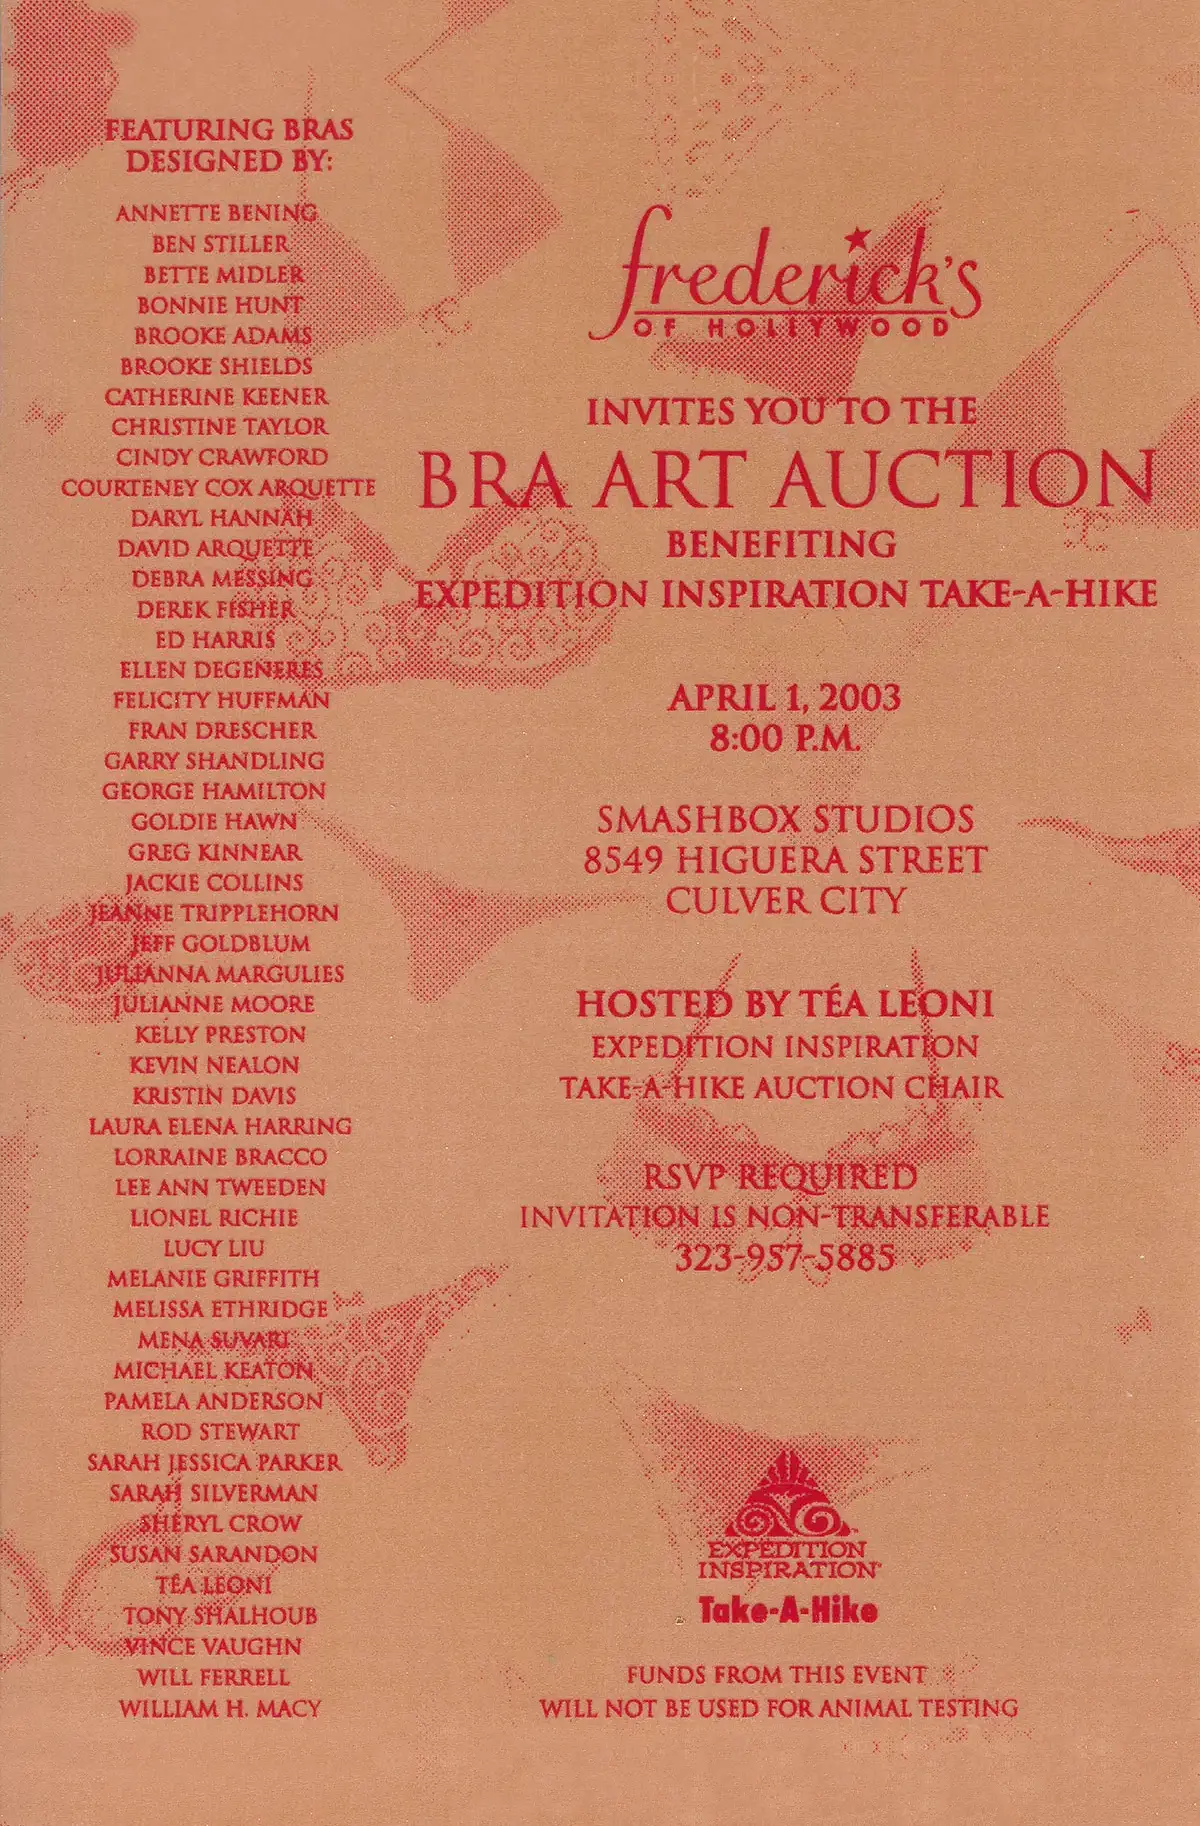 Frederick's Bra Art Benefit Auction, Take A Hike Expedition Inspiration Fund for Breast Cancer Research, April 1 2003